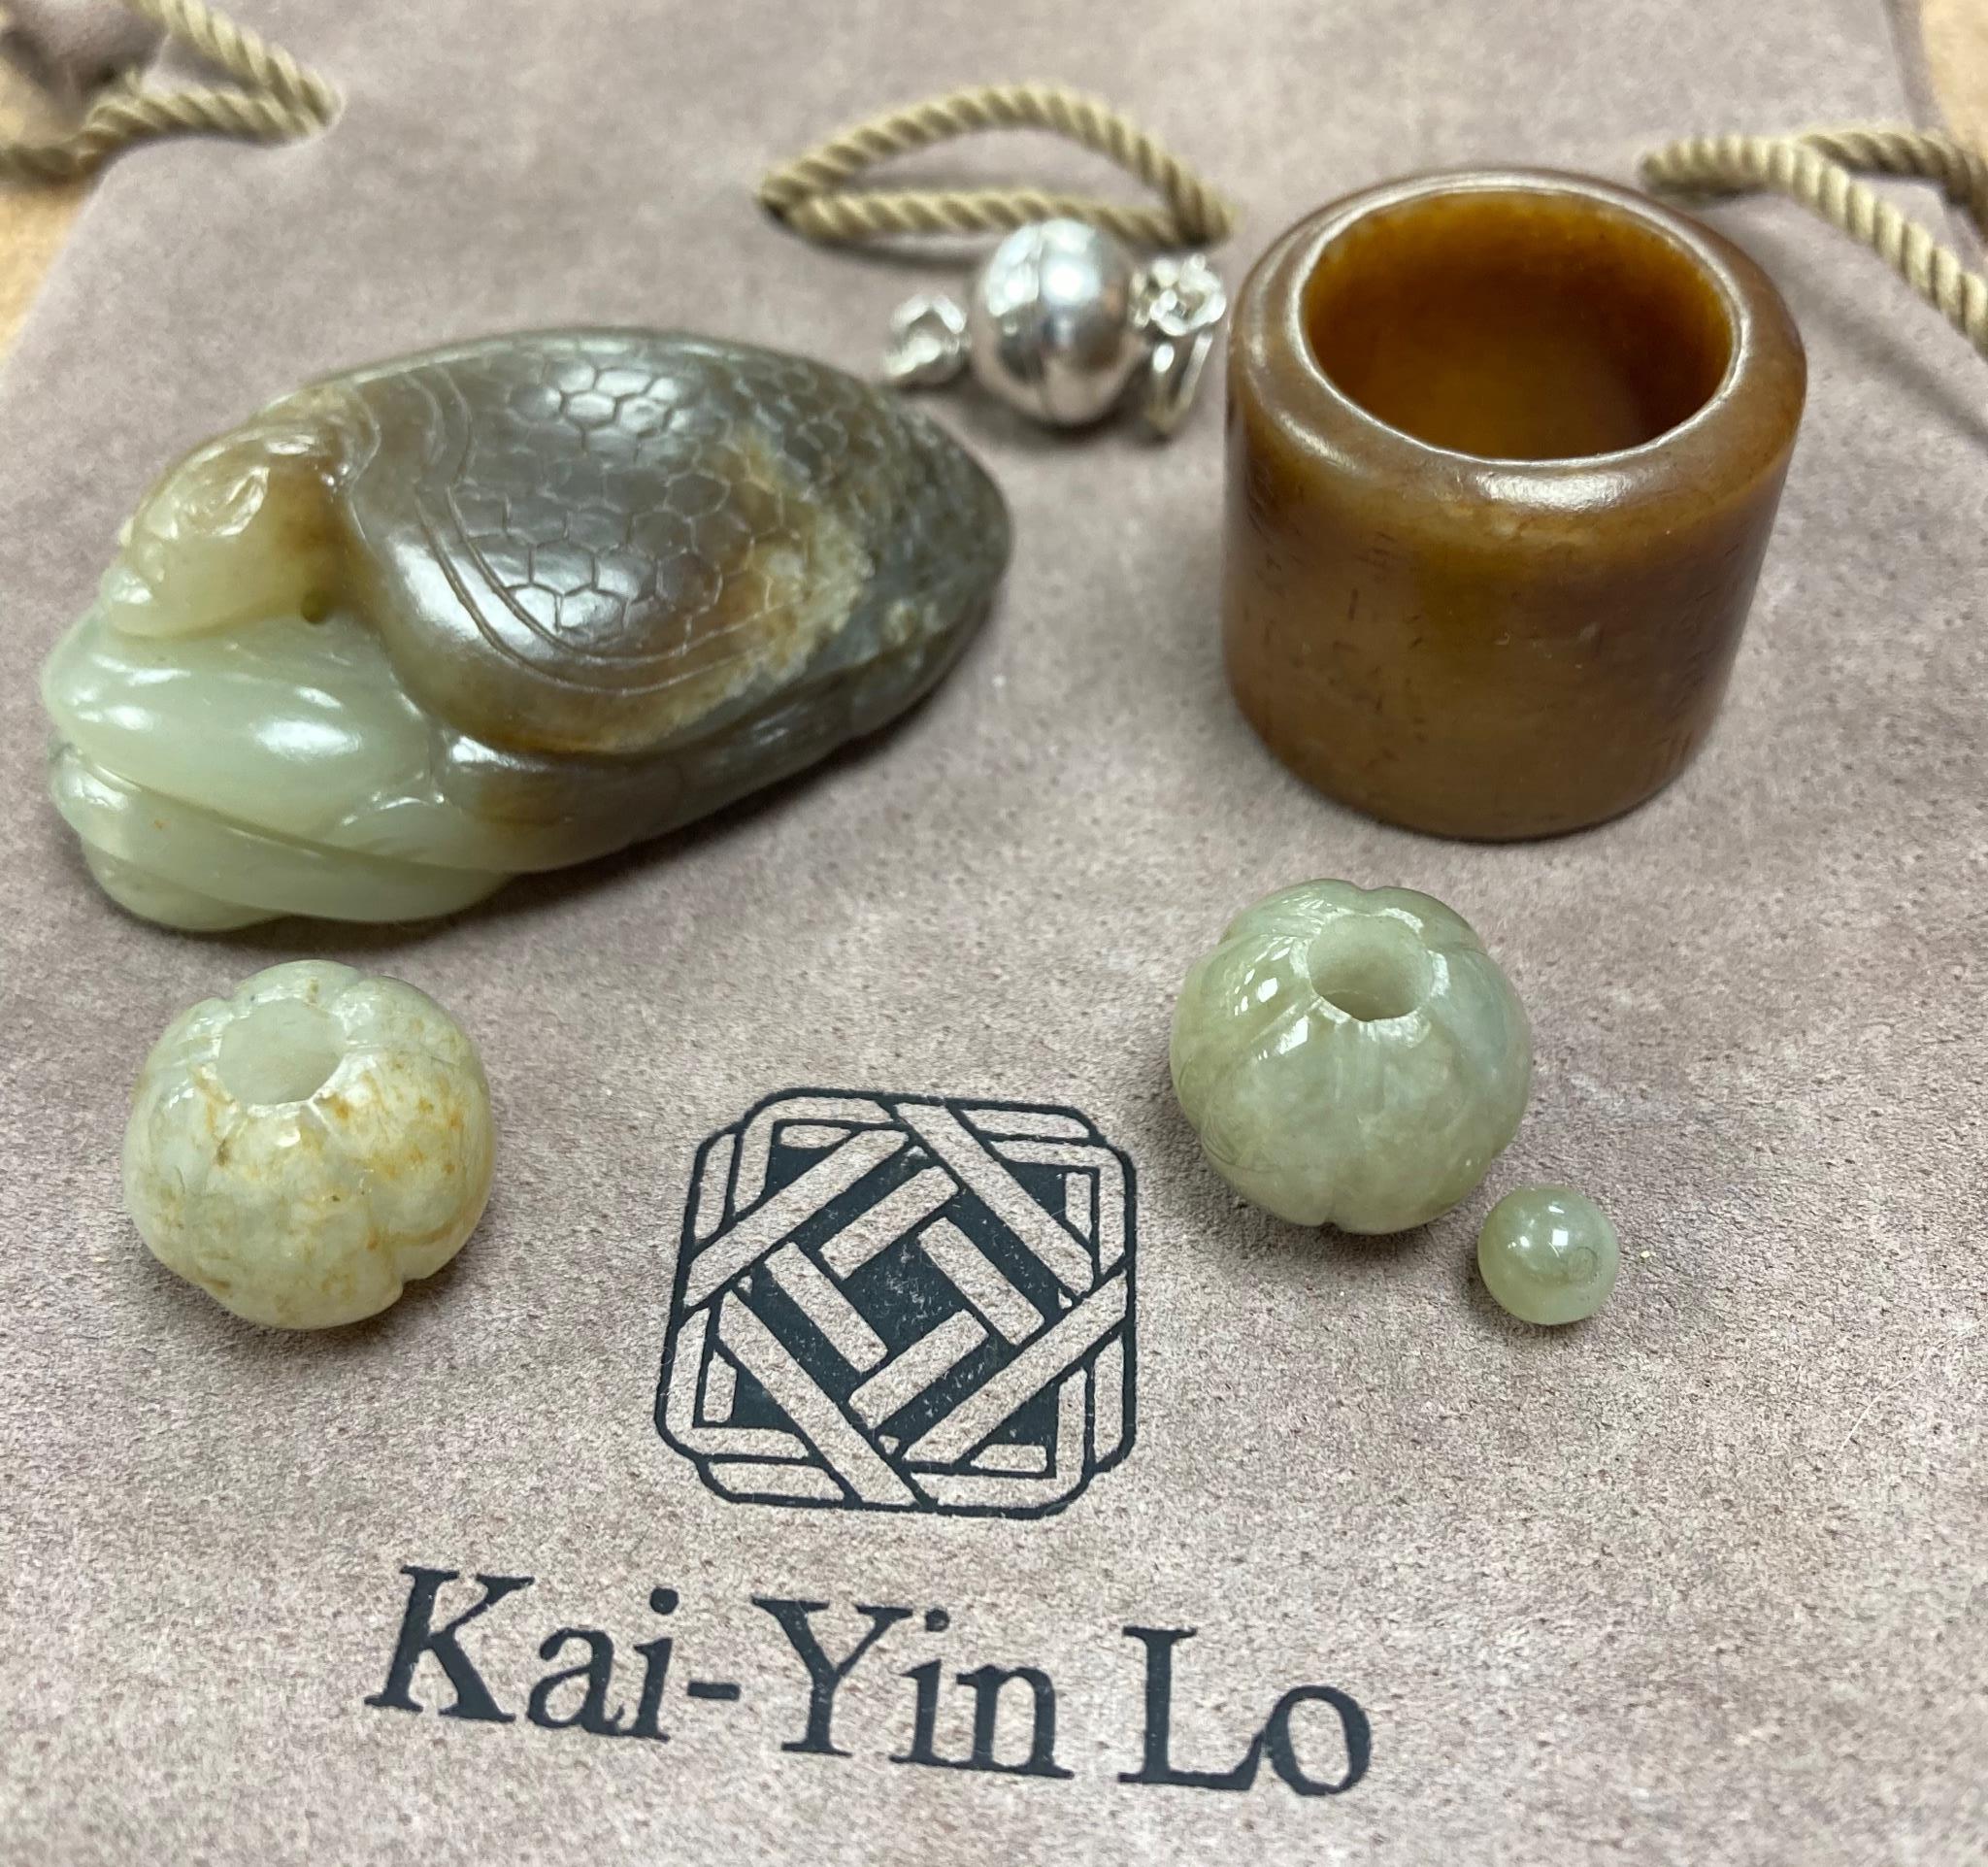 Kai Yin Lo of Hong Kong, a jade turtle and snake pendant, jade archer’s ring and two beads, formerly